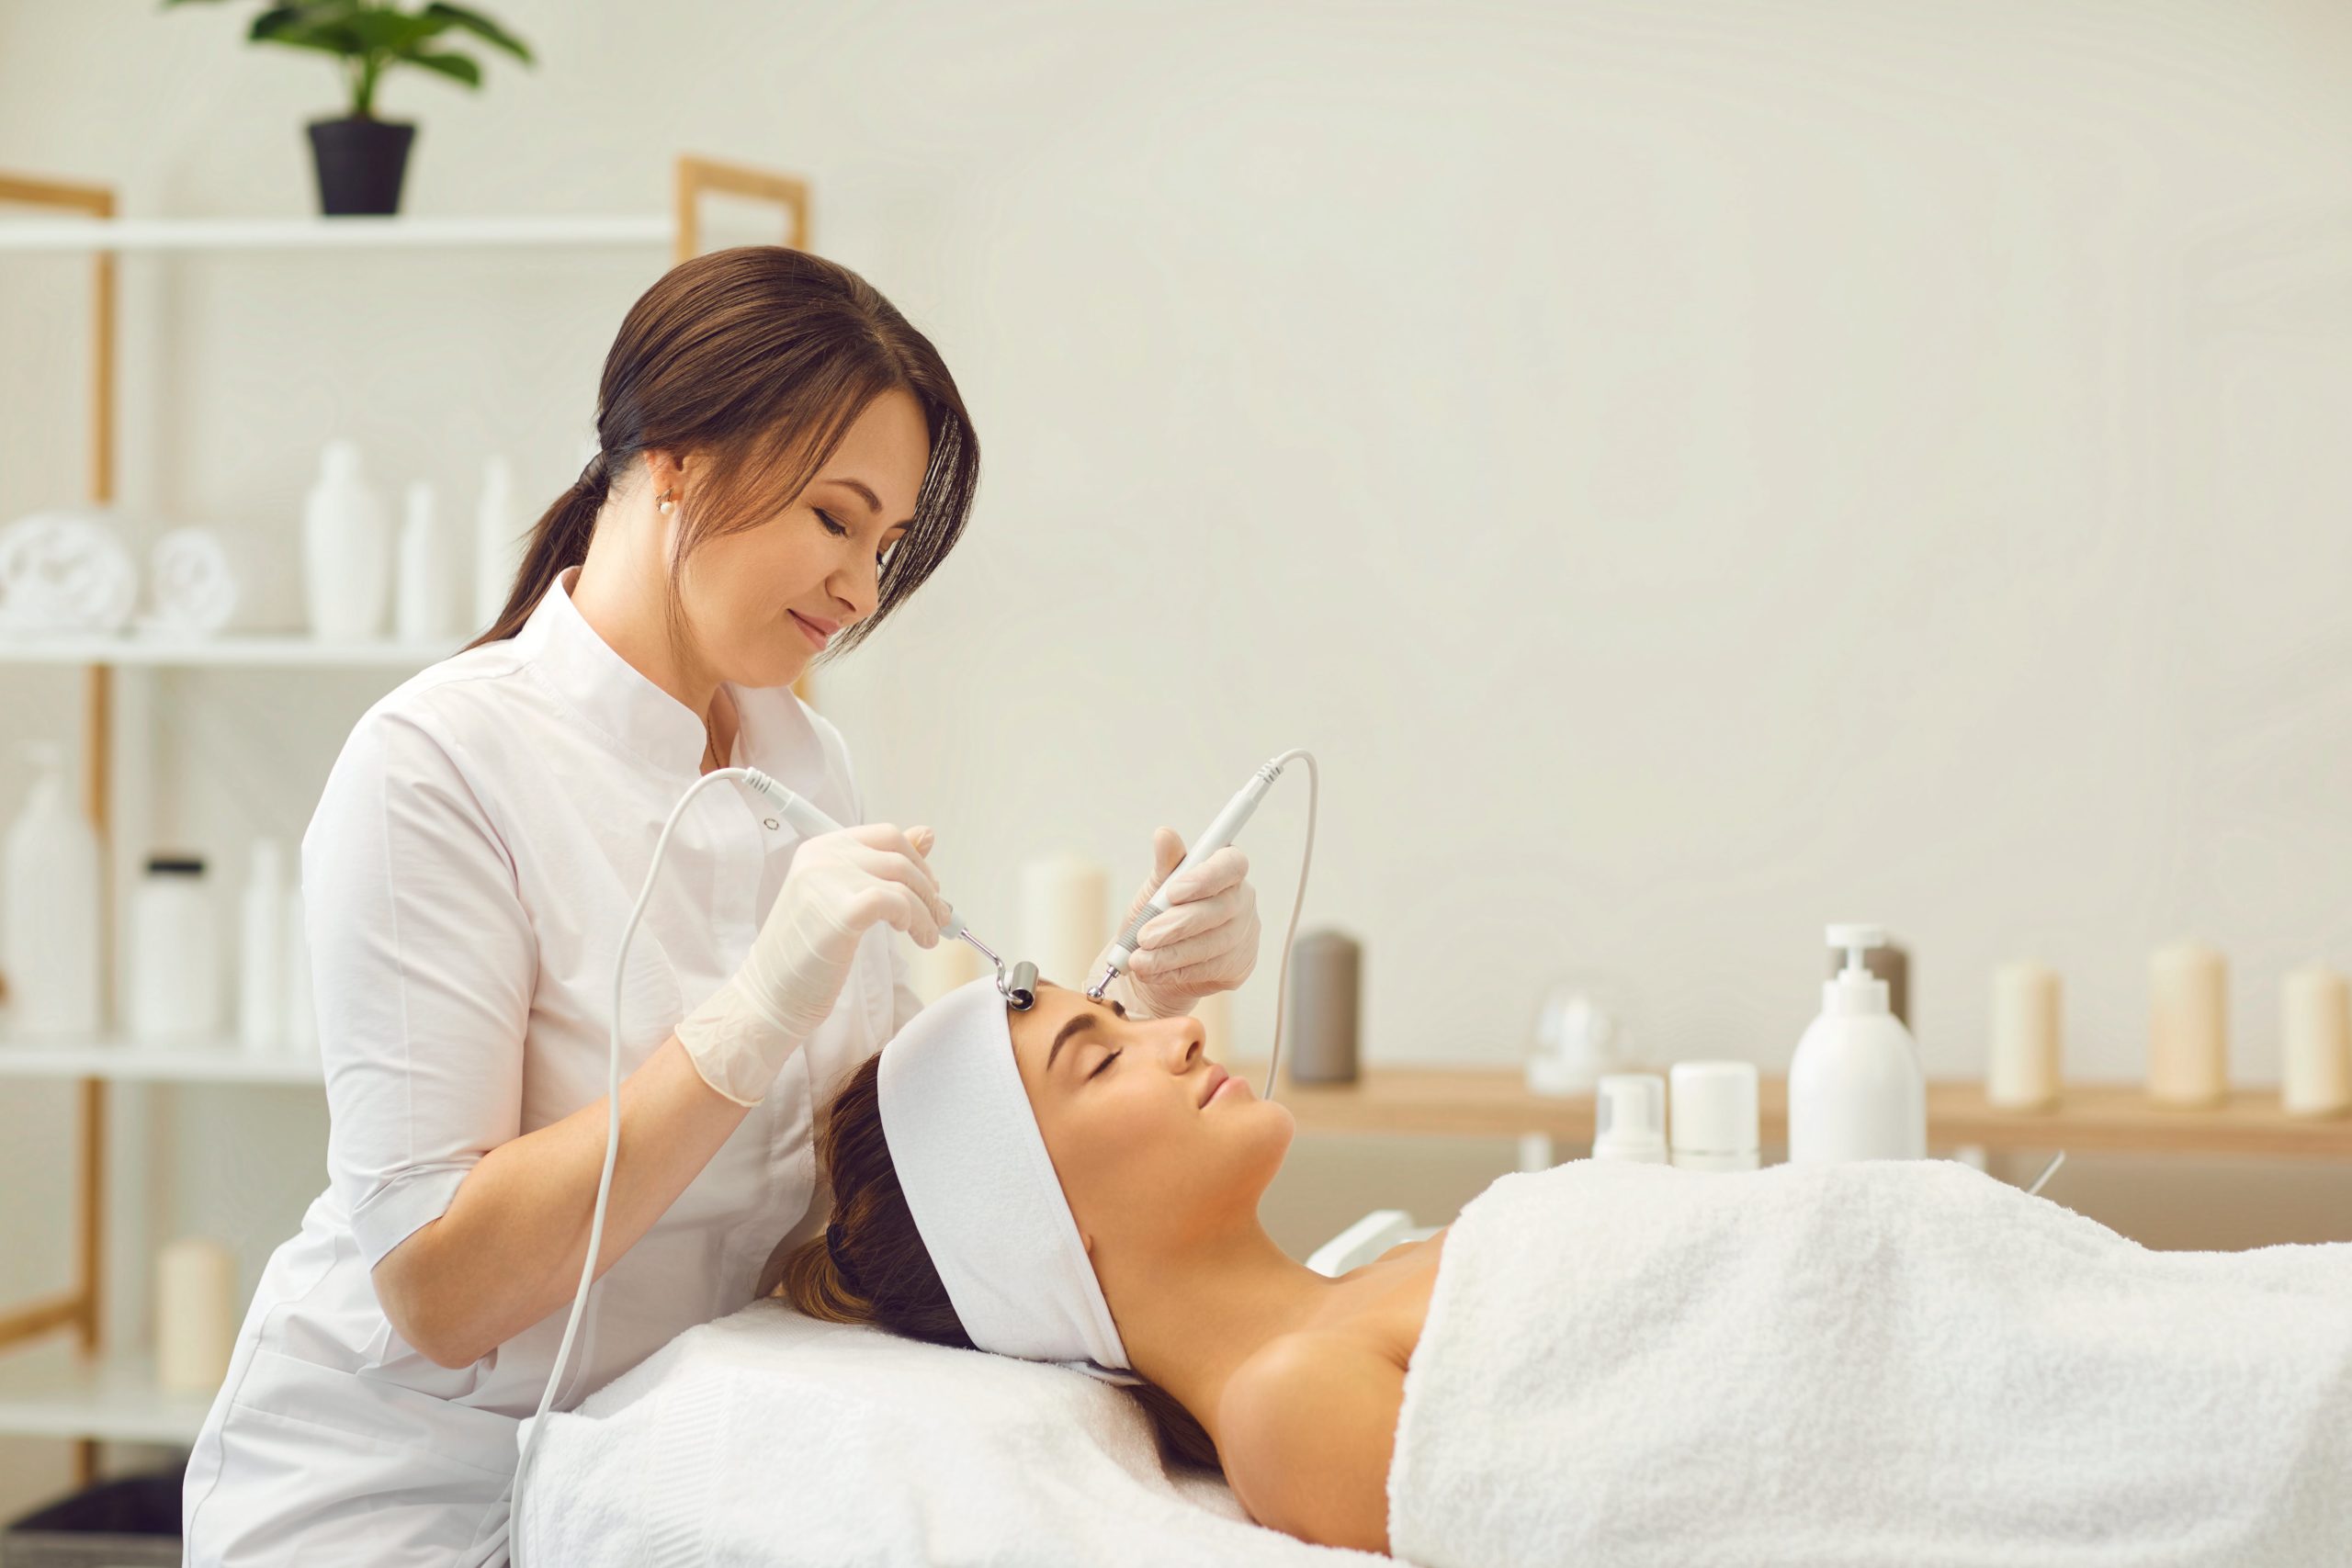 Medical Spa Everything you need to know